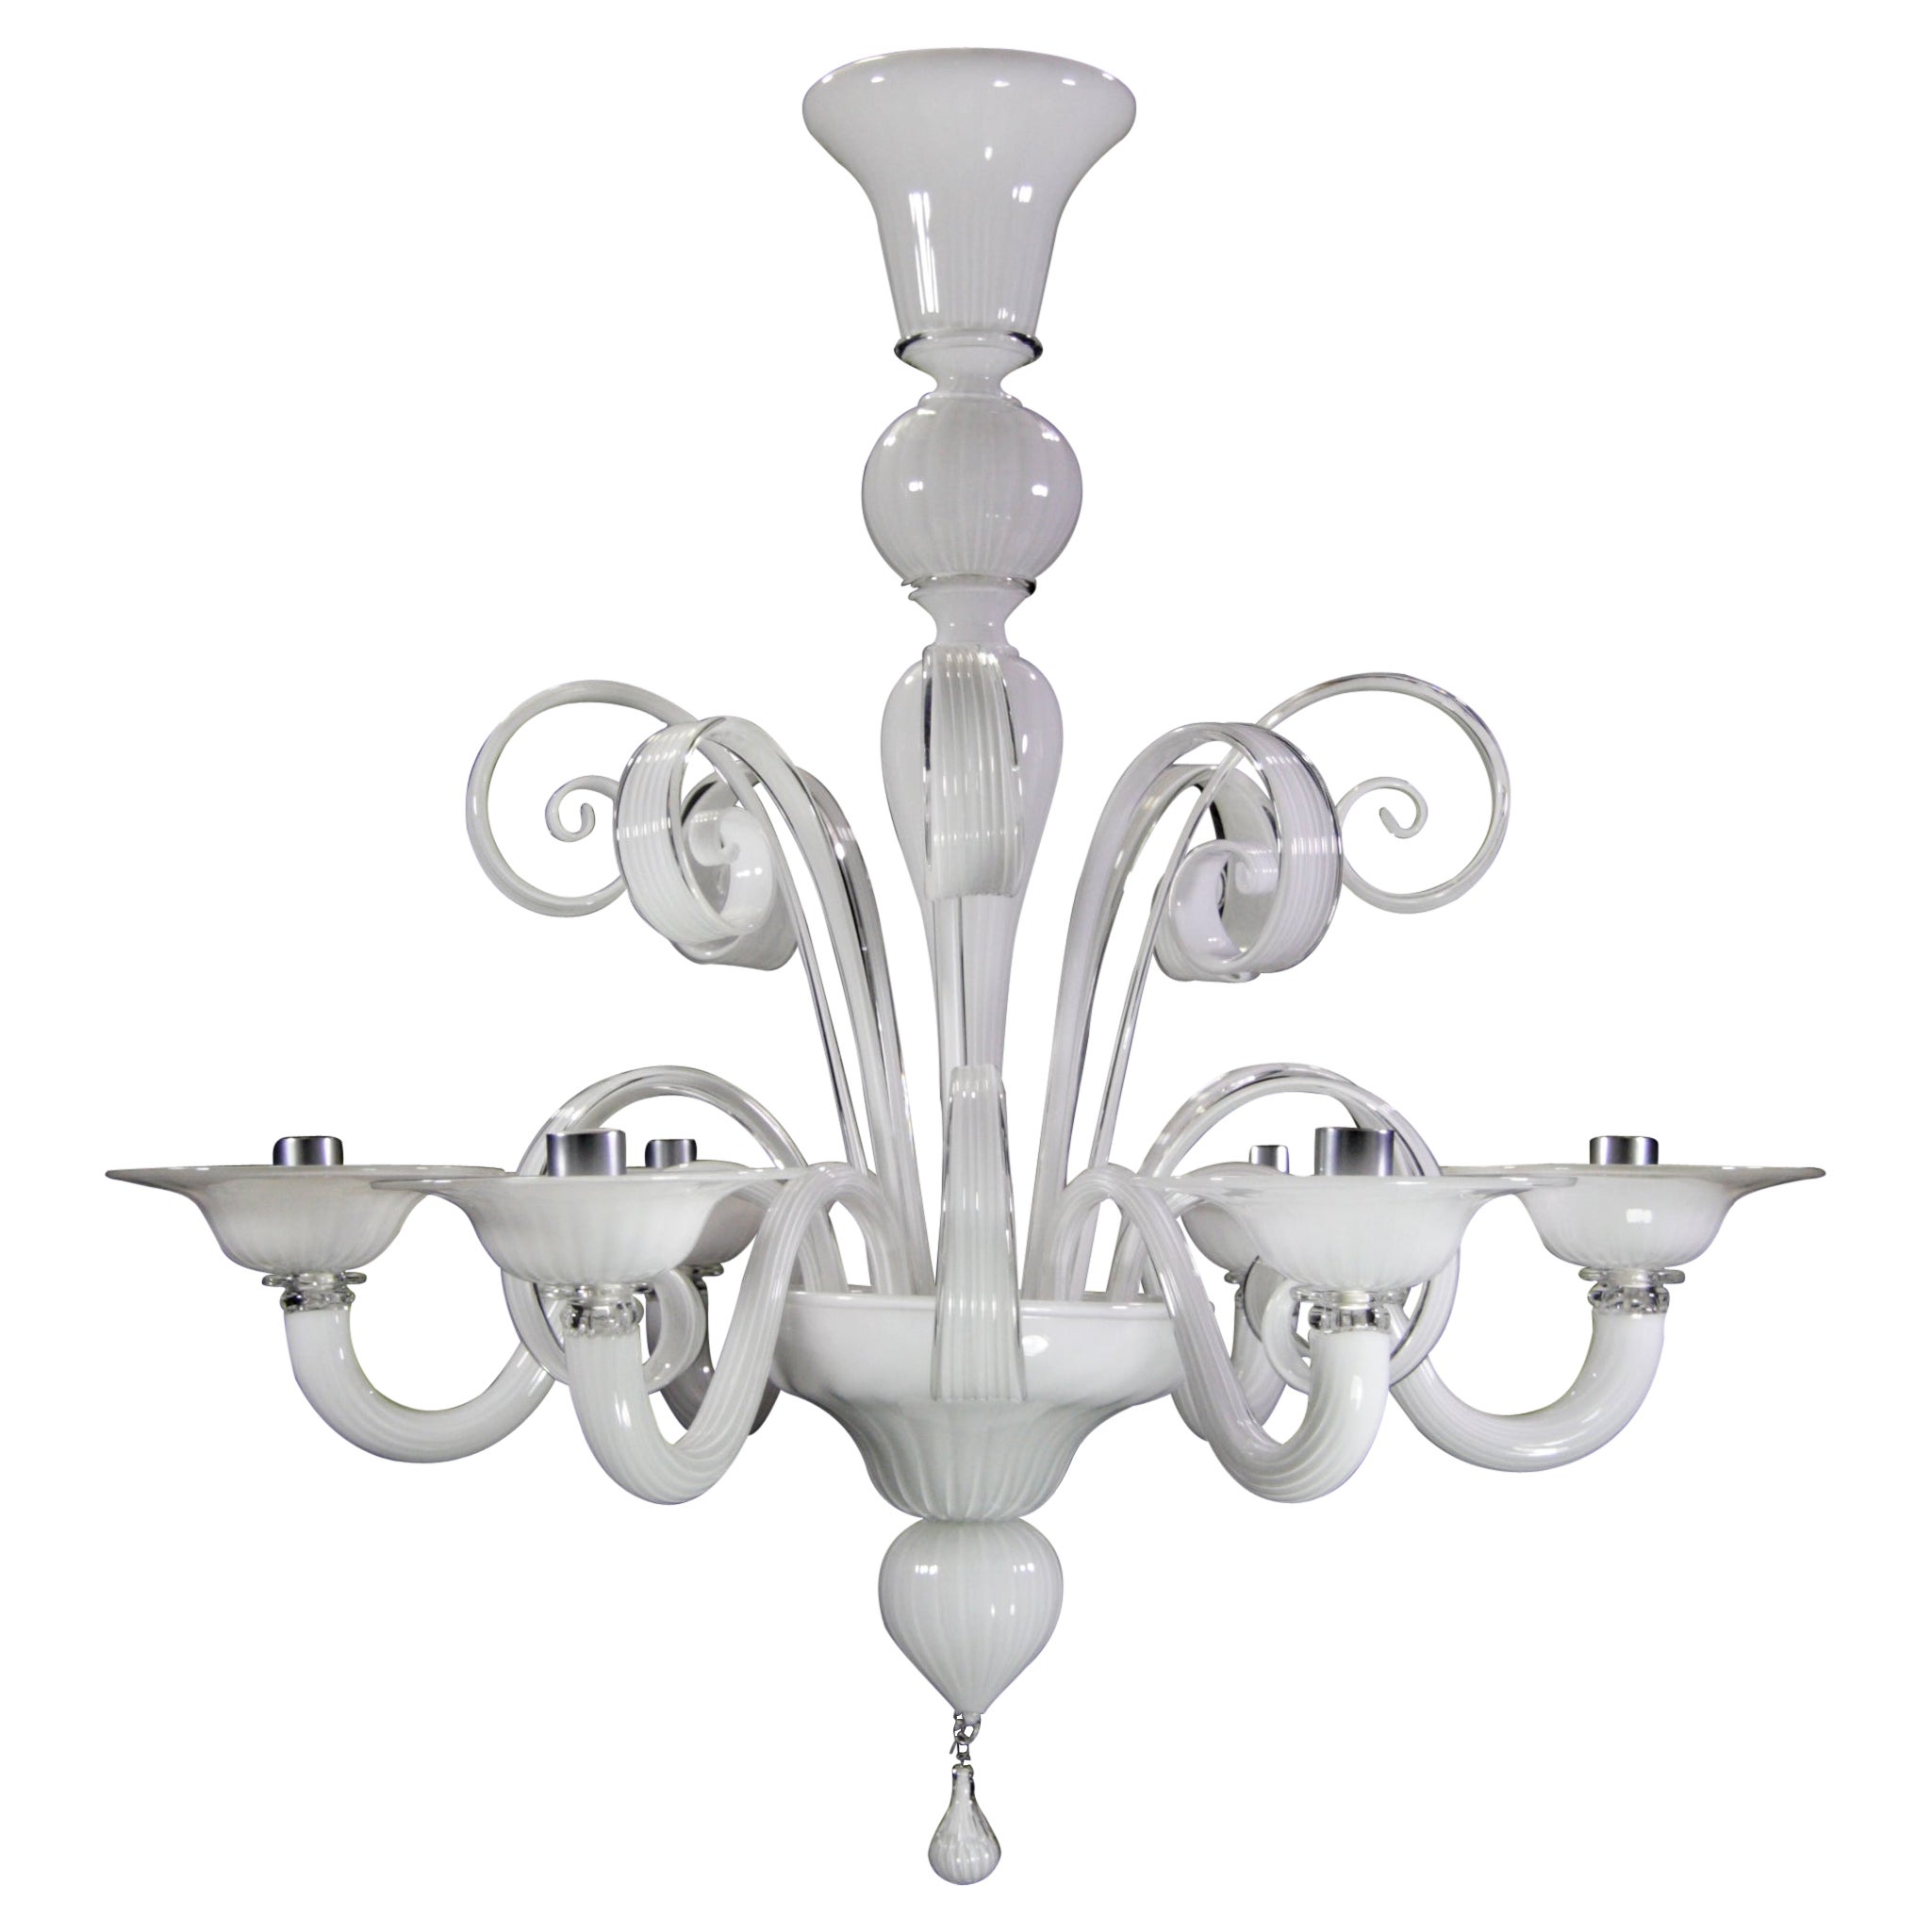 Chandelier 6 Arms White Handblown Artistic Murano Glass by Multiforme